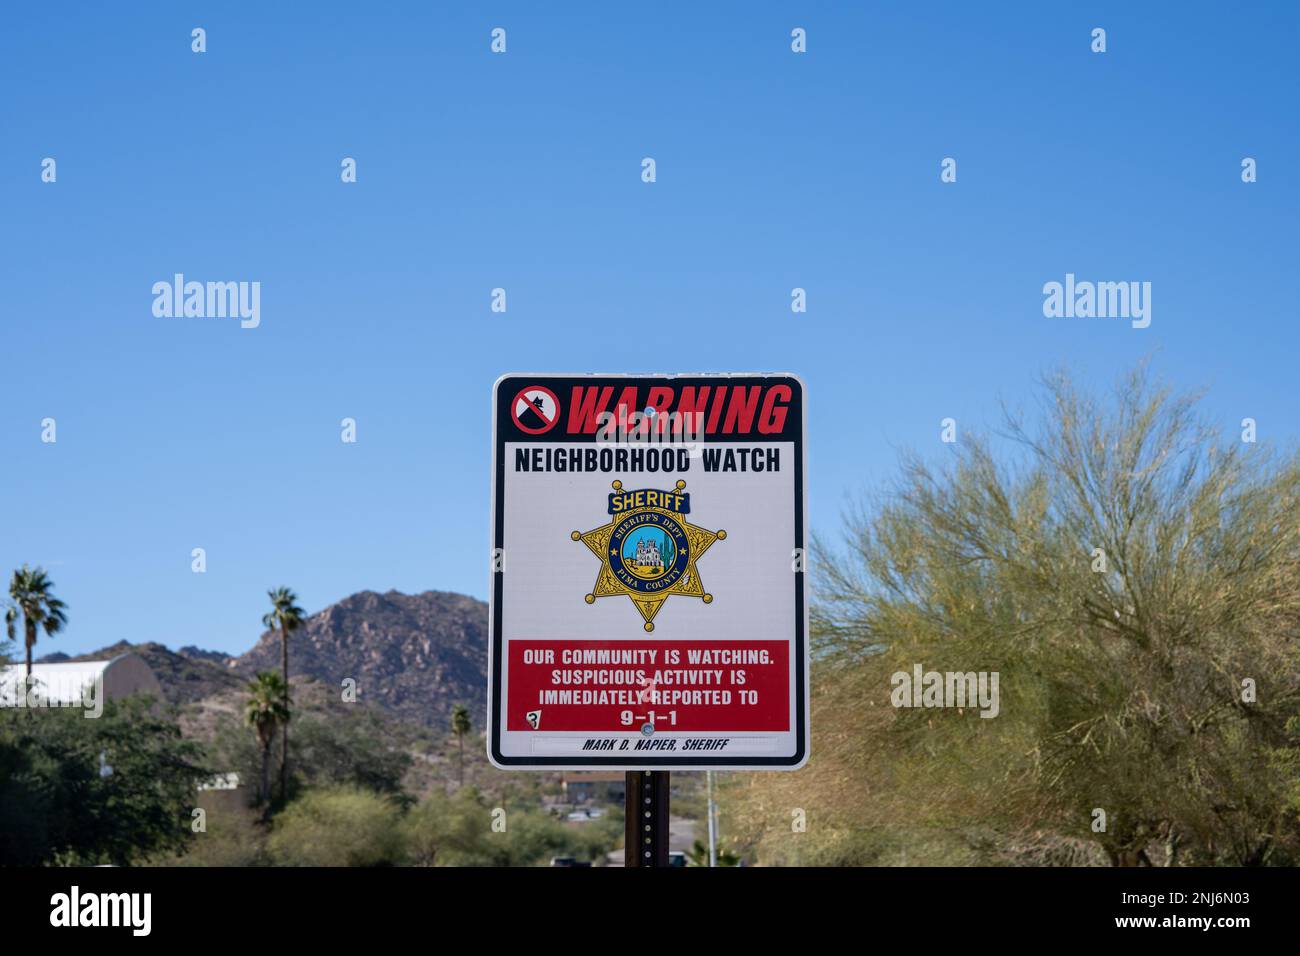 Ajo, AZ - Nov. 28, 2022: Neighborhood watch sign with Pima County Sheriff logo. Ajo crime rates are 24% lower than the national average according to 2 Stock Photo